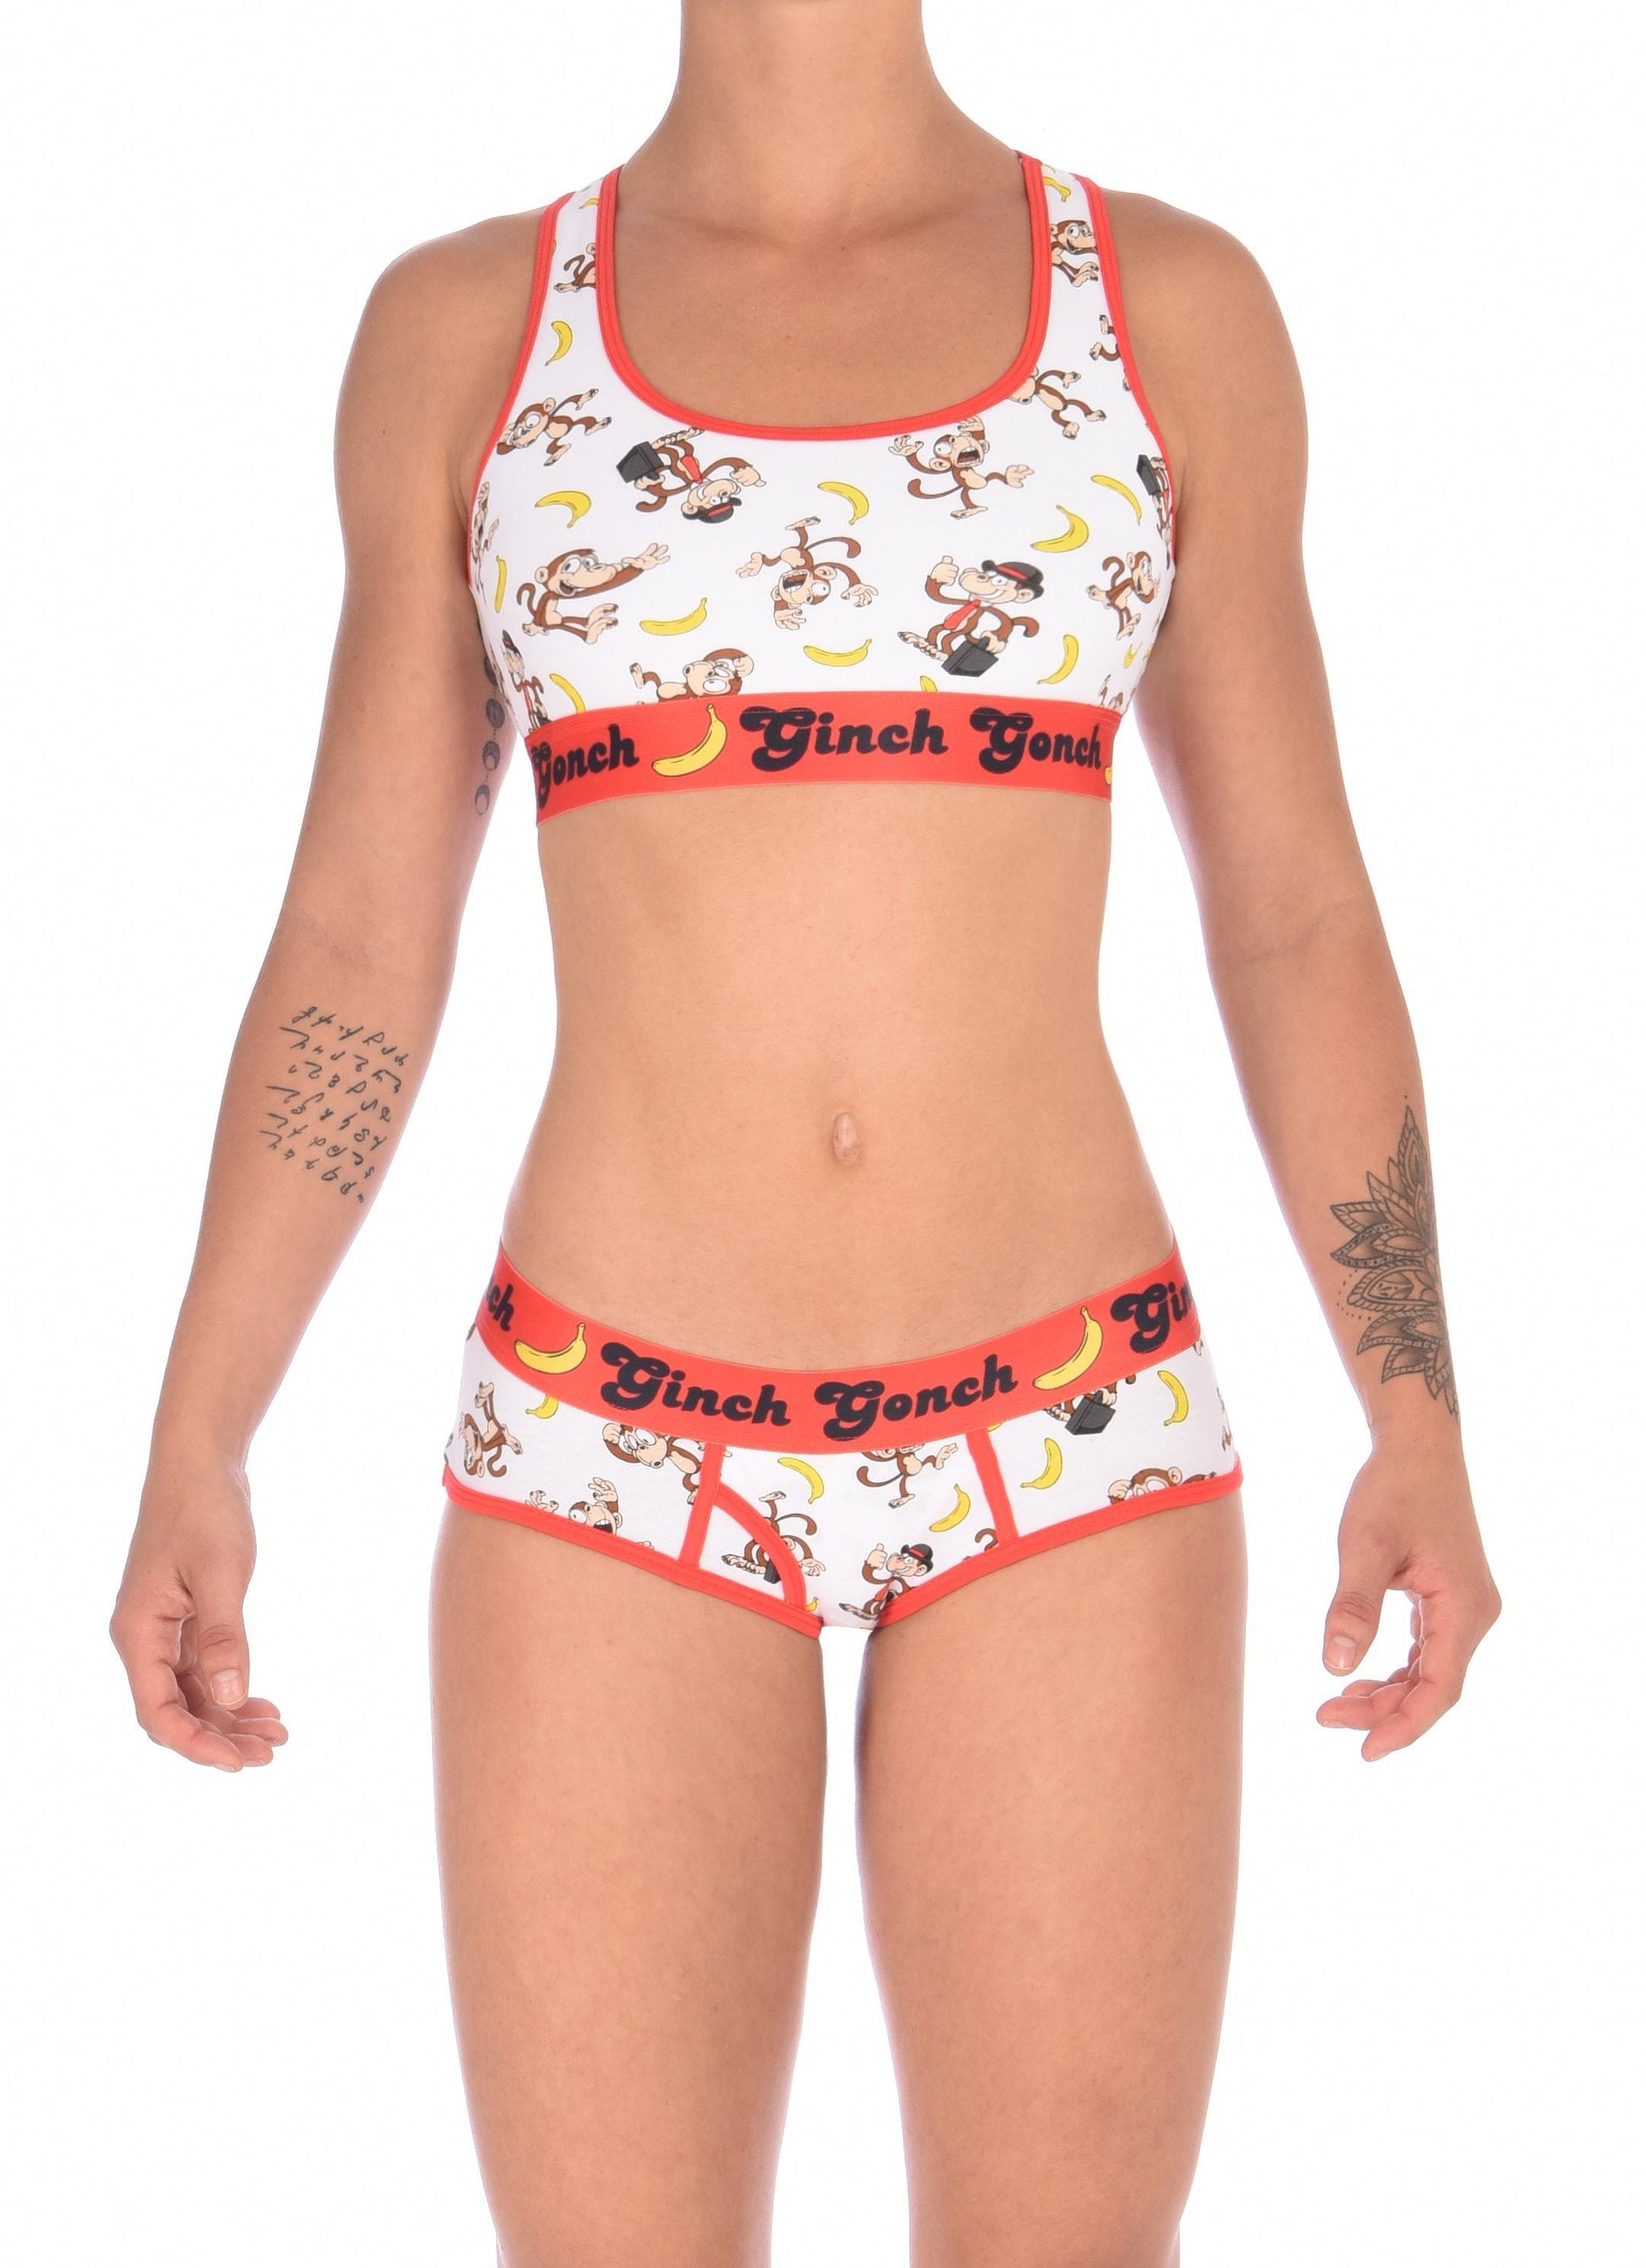 GG Ginch Gonch Gone Bananas boy cut Brief women's underwear y front white fabric with monkeys and bananas red trim and red printed waistband front shown with matching sports bra